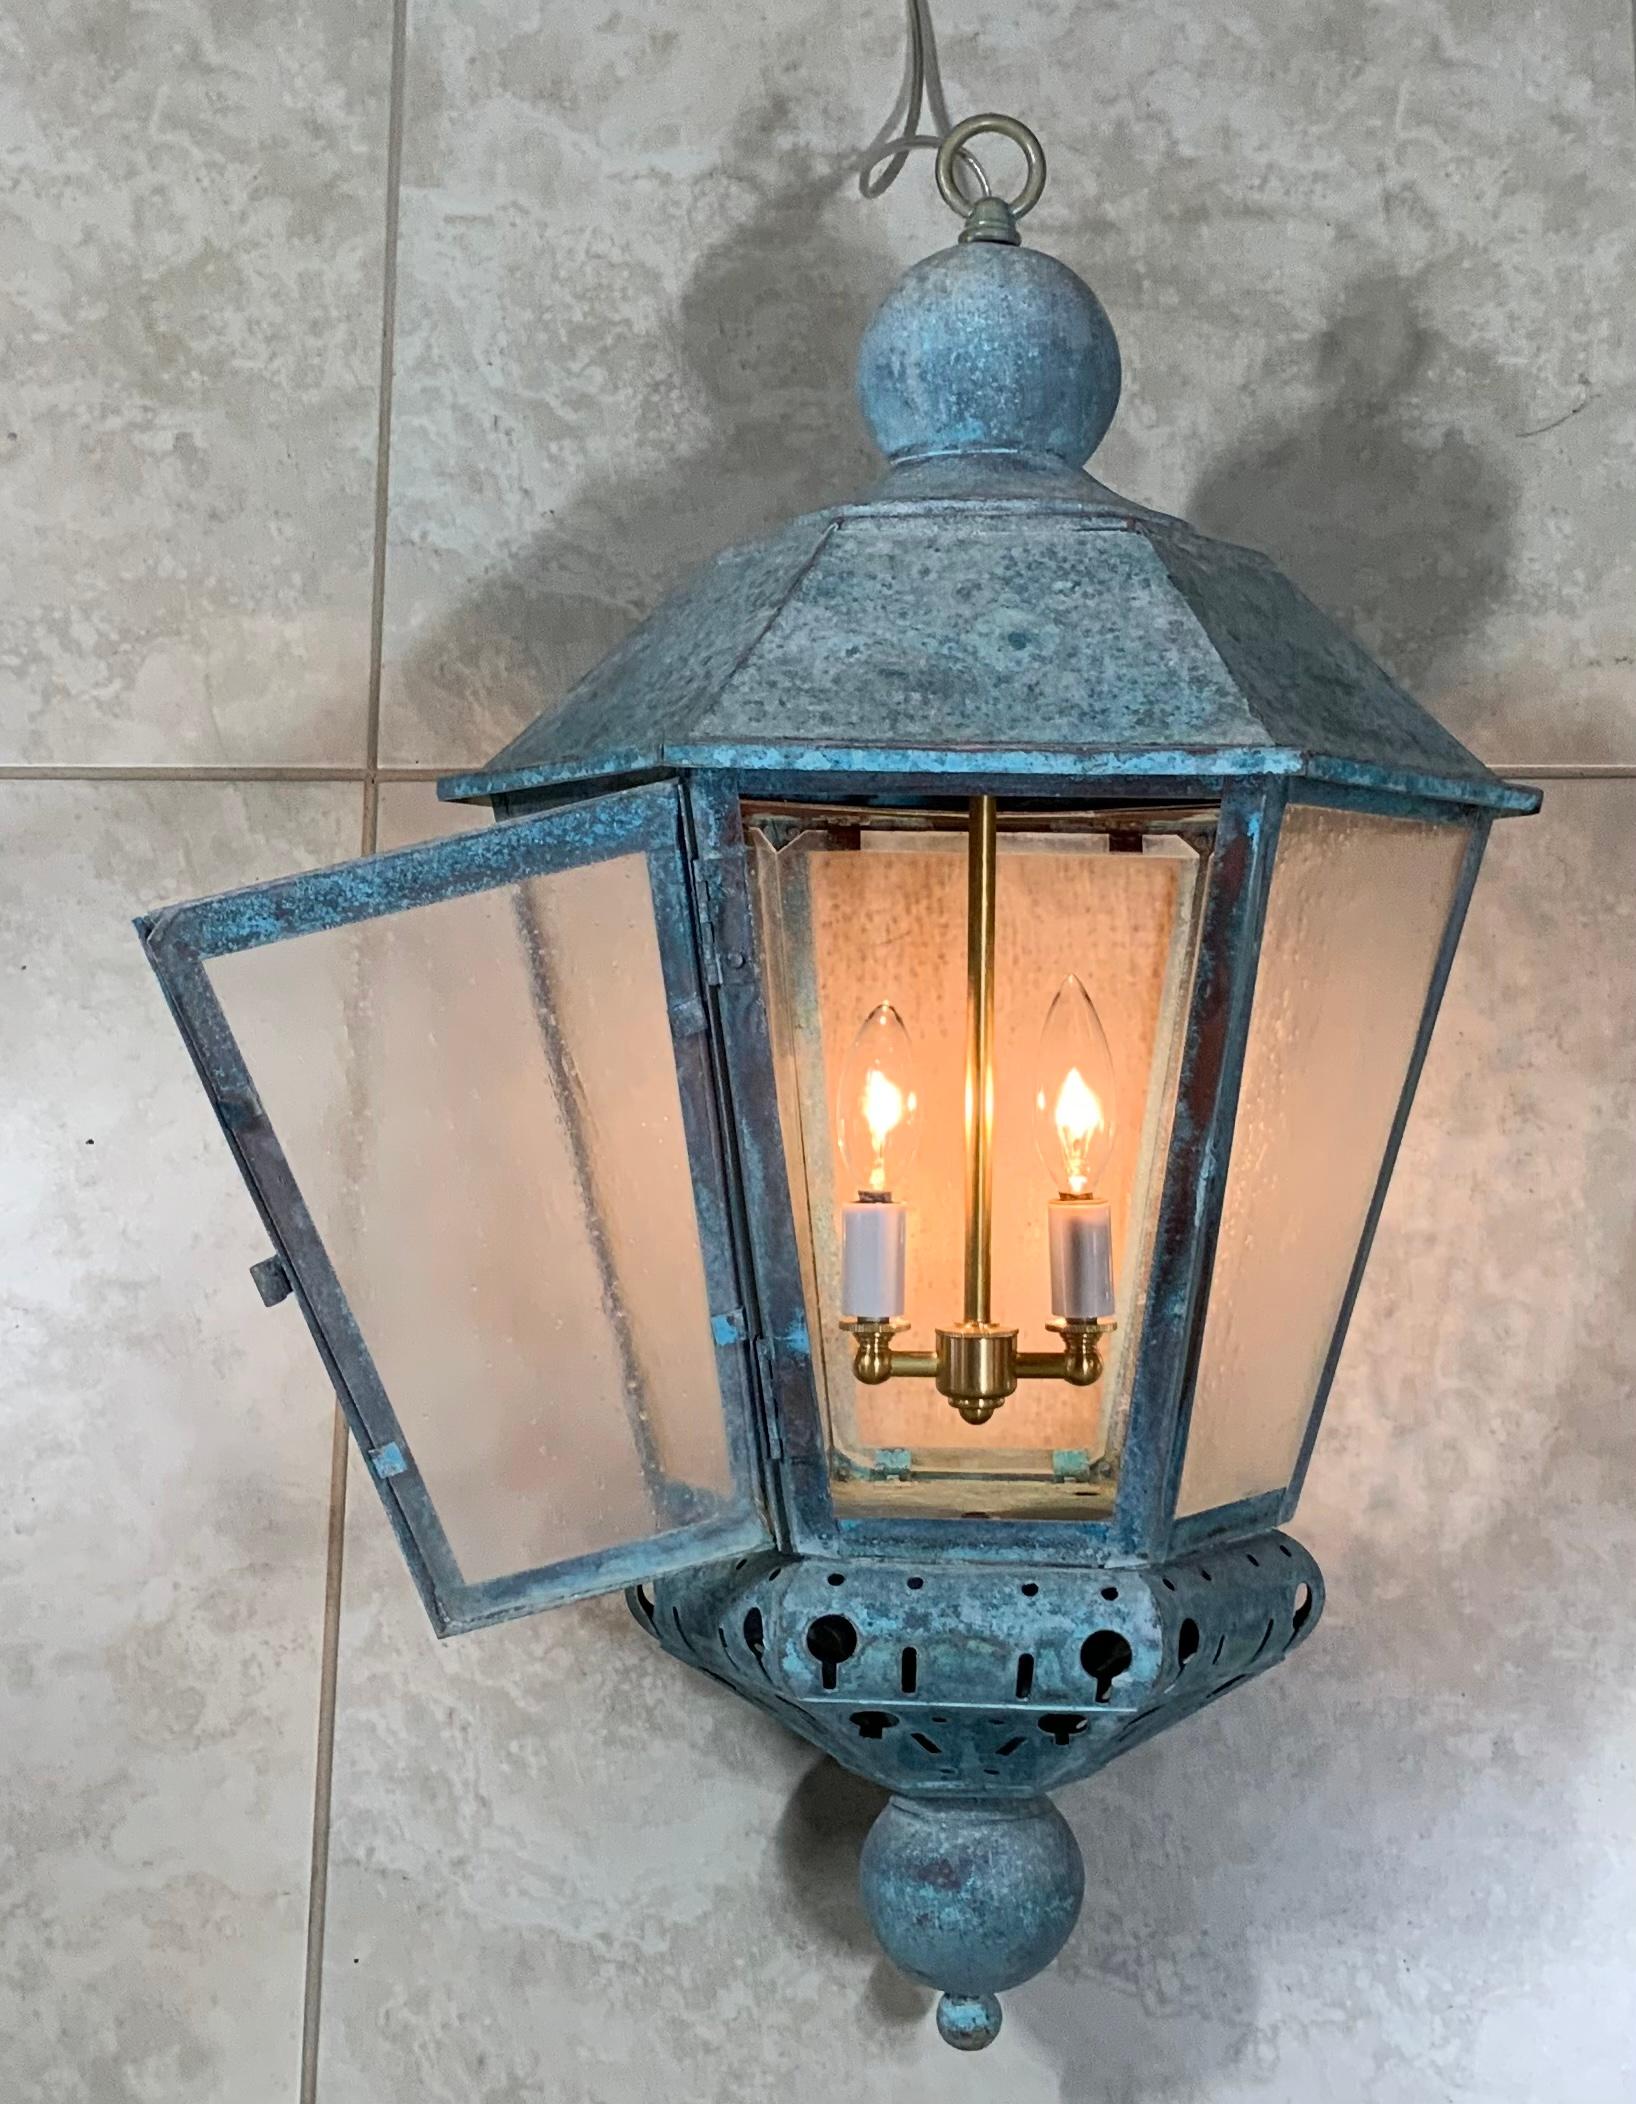 Artistically made vintage hand crafted solid brass and copper lantern with two 60/watt light , seeded acrylic glass like at all sides, with beautiful original weathered turquoise-green patina. Originally was converted from wall lantern to hanging